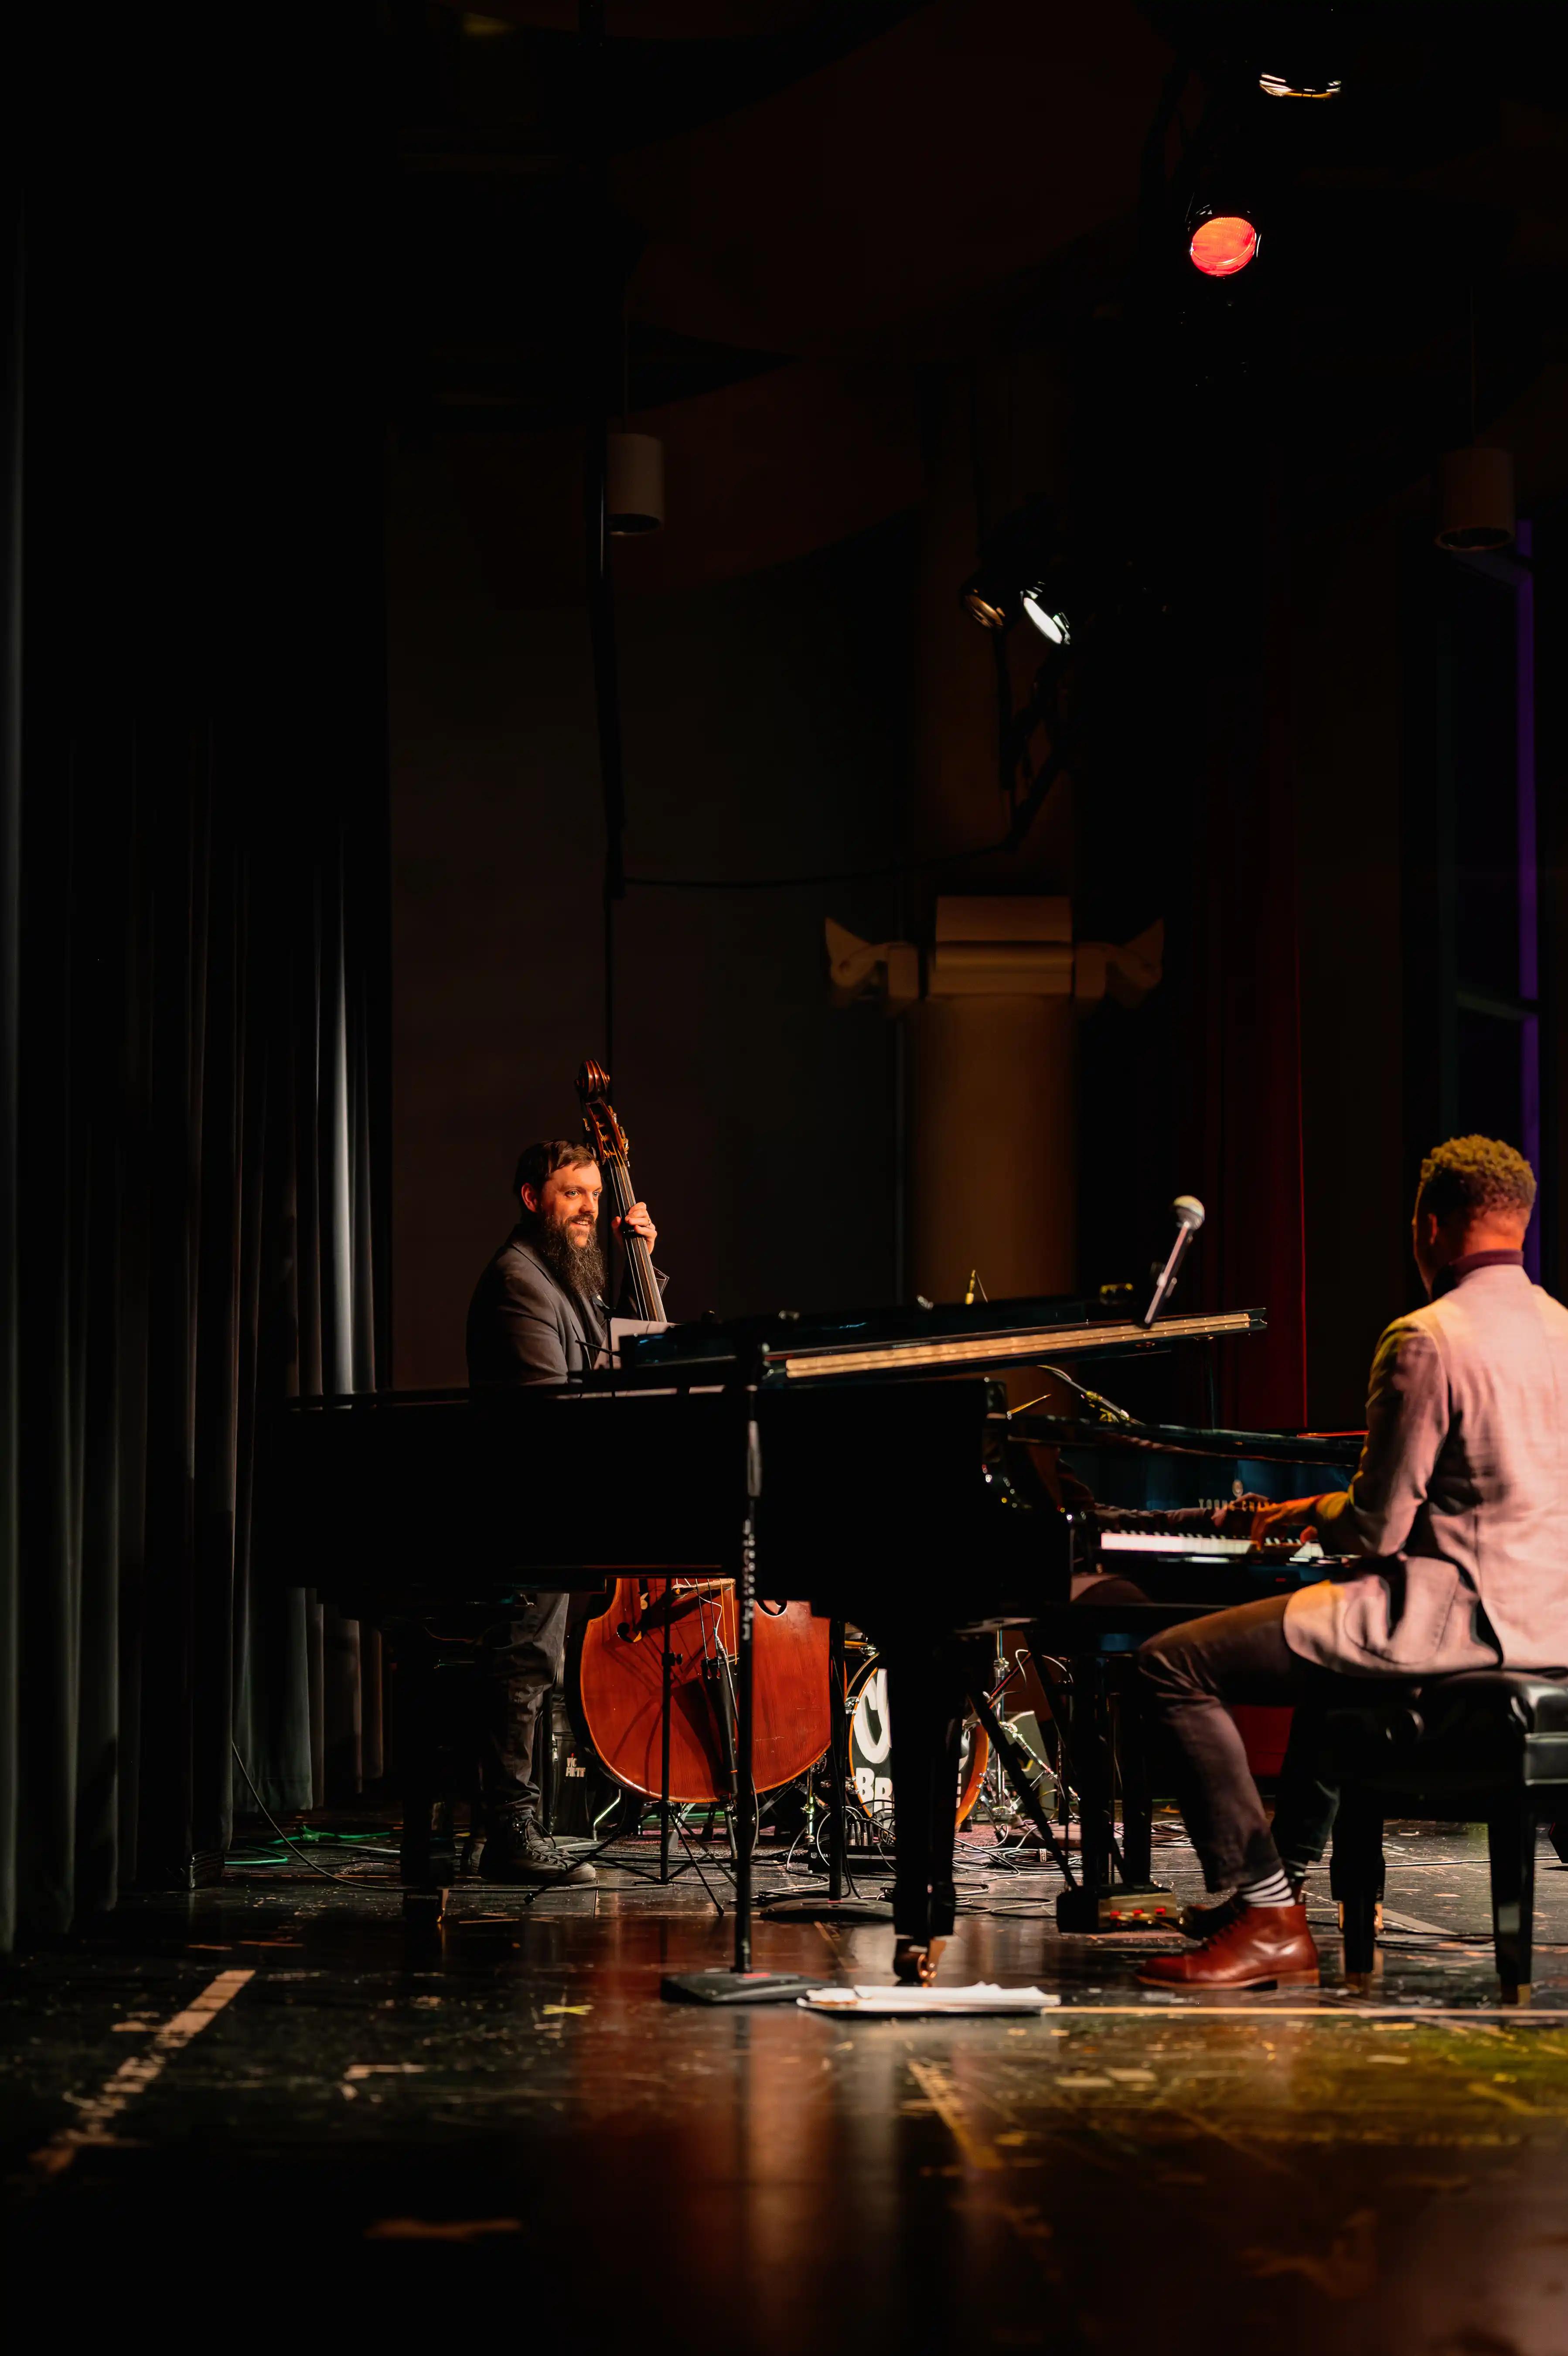 Two musicians on stage with a pianist facing the grand piano and another musician with a saxophone sitting, both under spotlight.